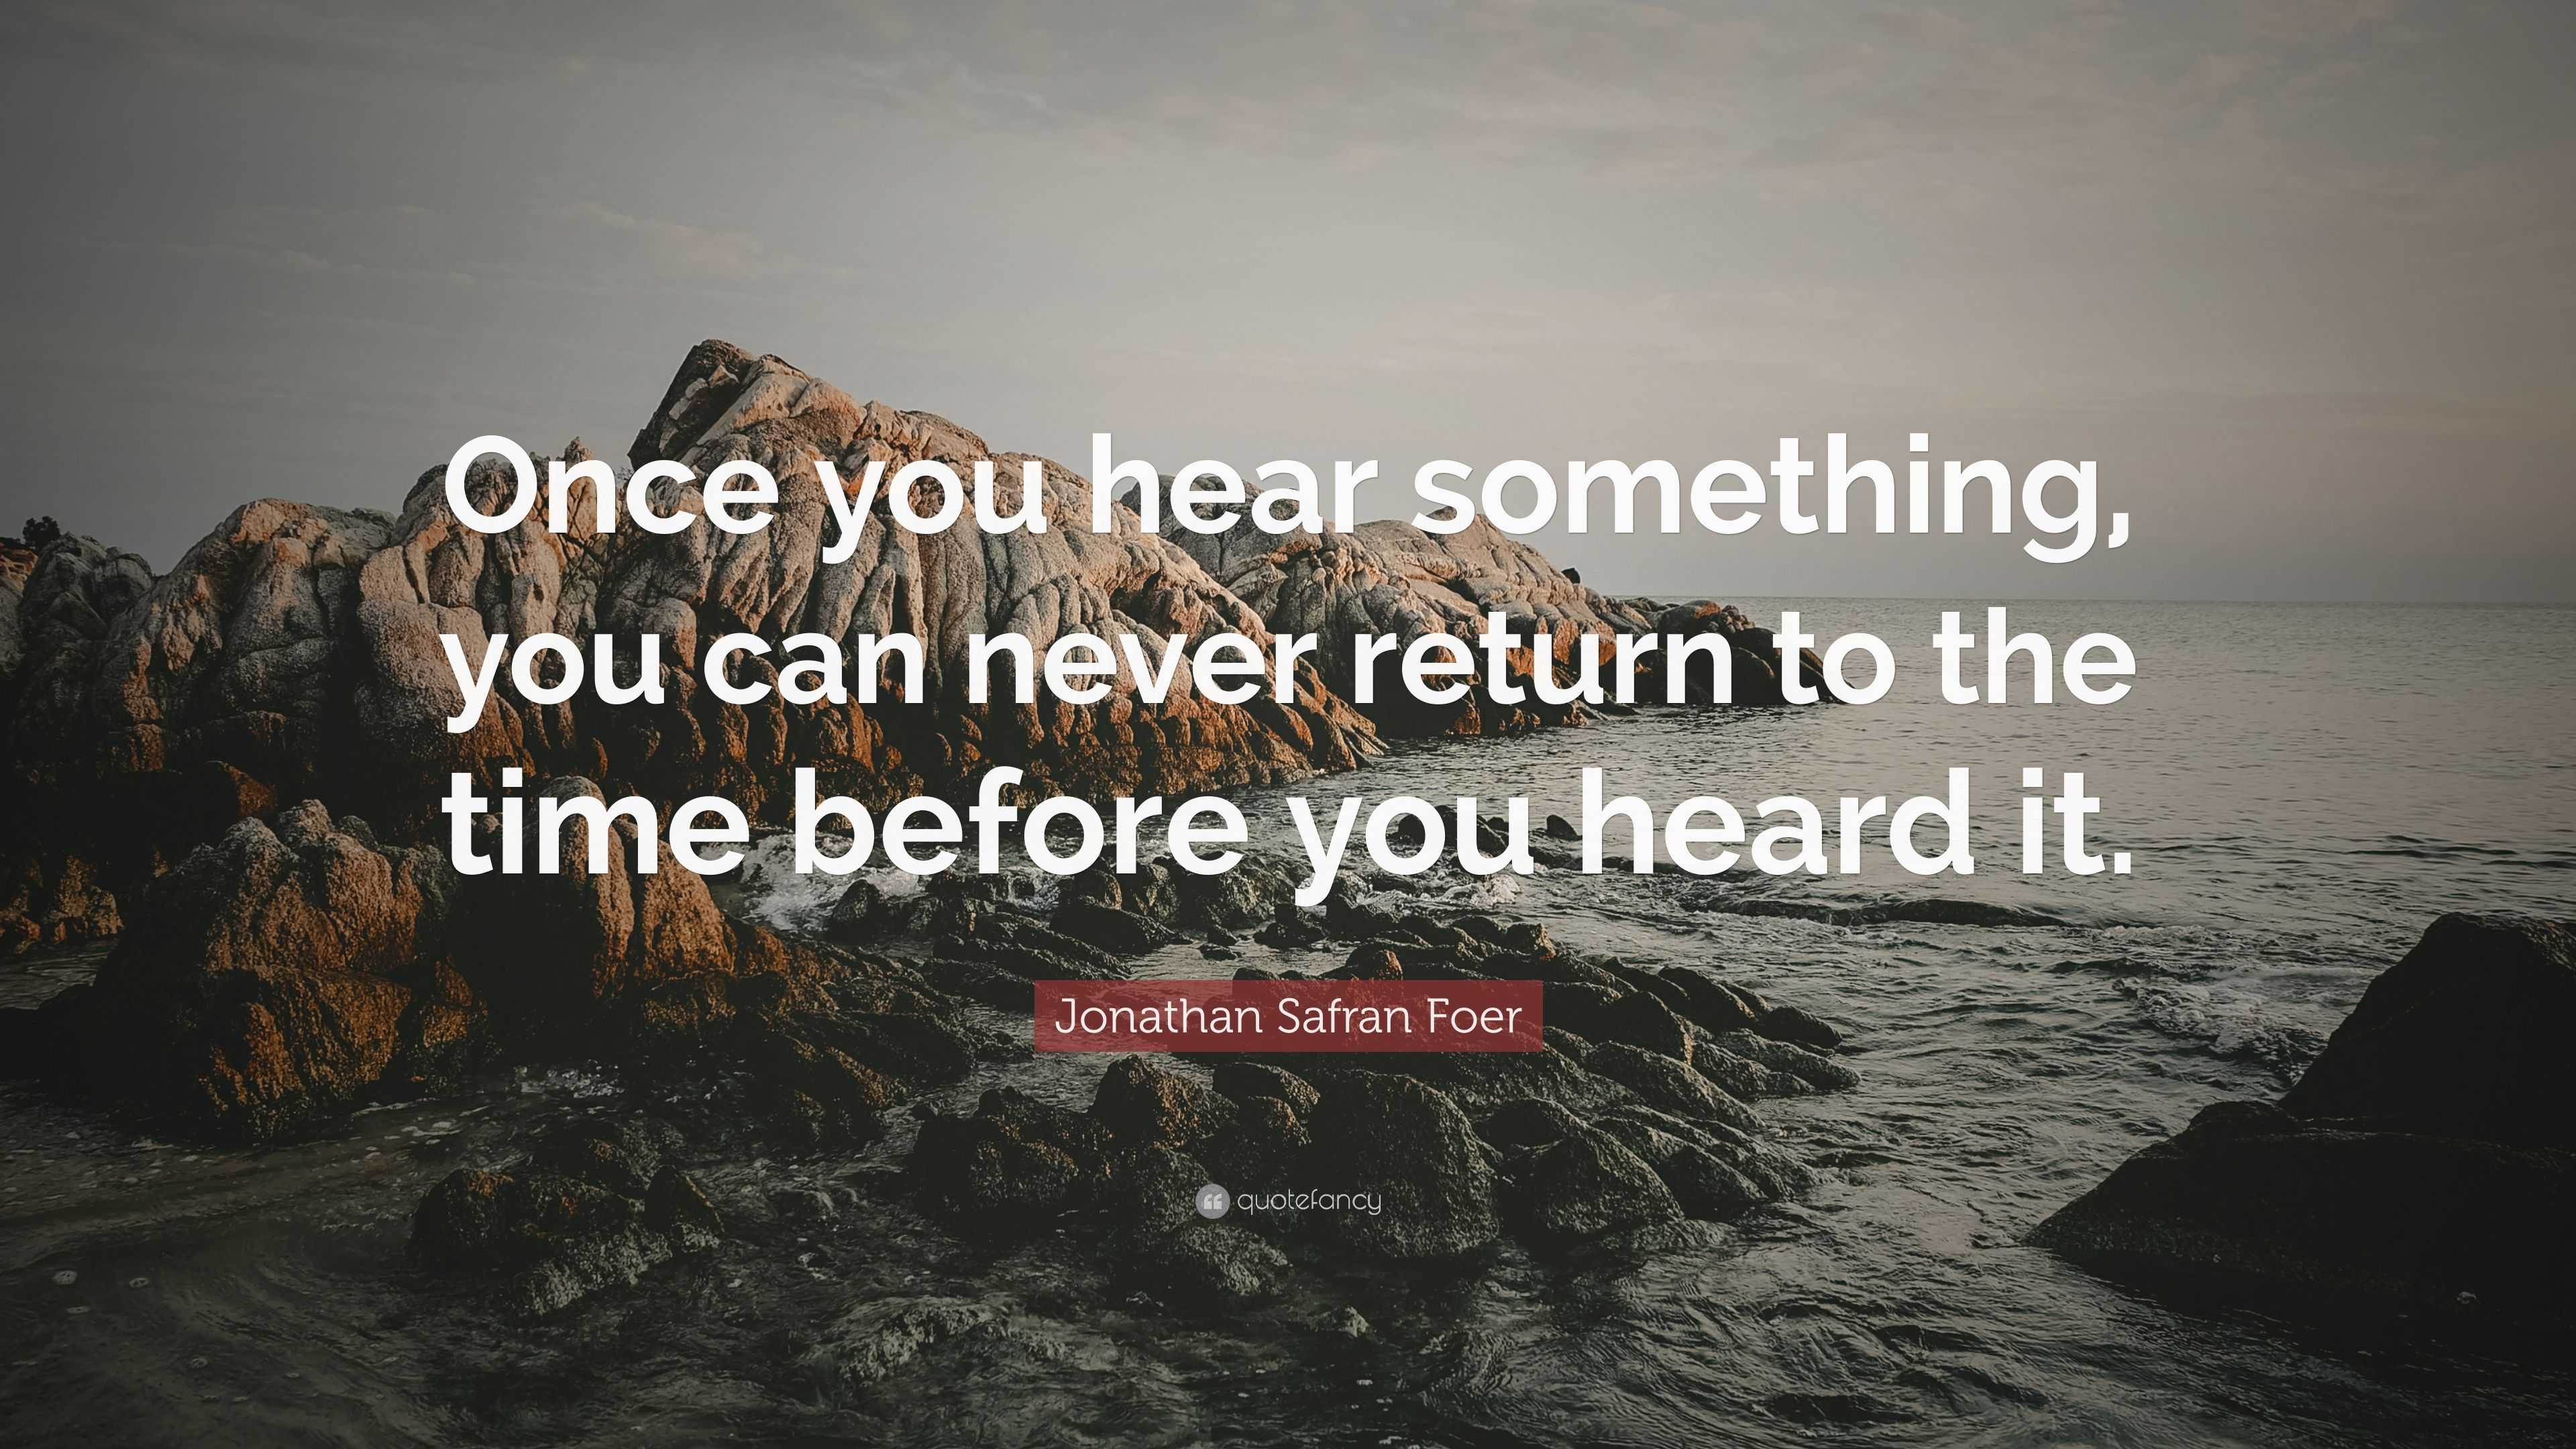 Jonathan Safran Foer Quote: “Once you hear something, you can never ...